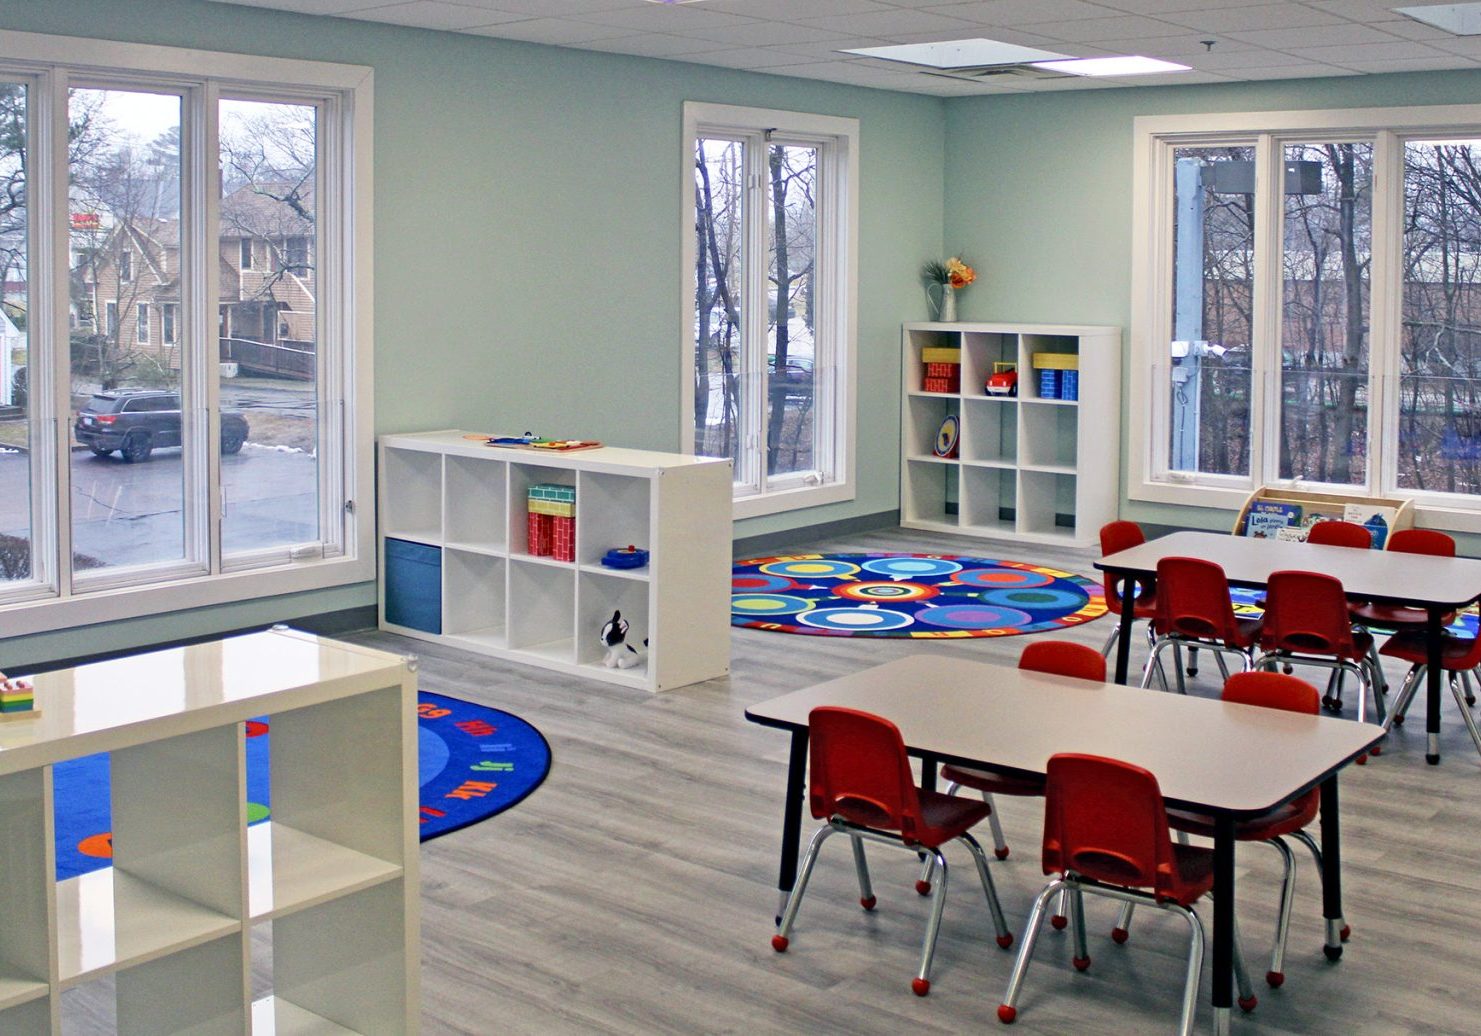 One of fourteen classrooms in SELA's new Norwell campus, courtesy image.